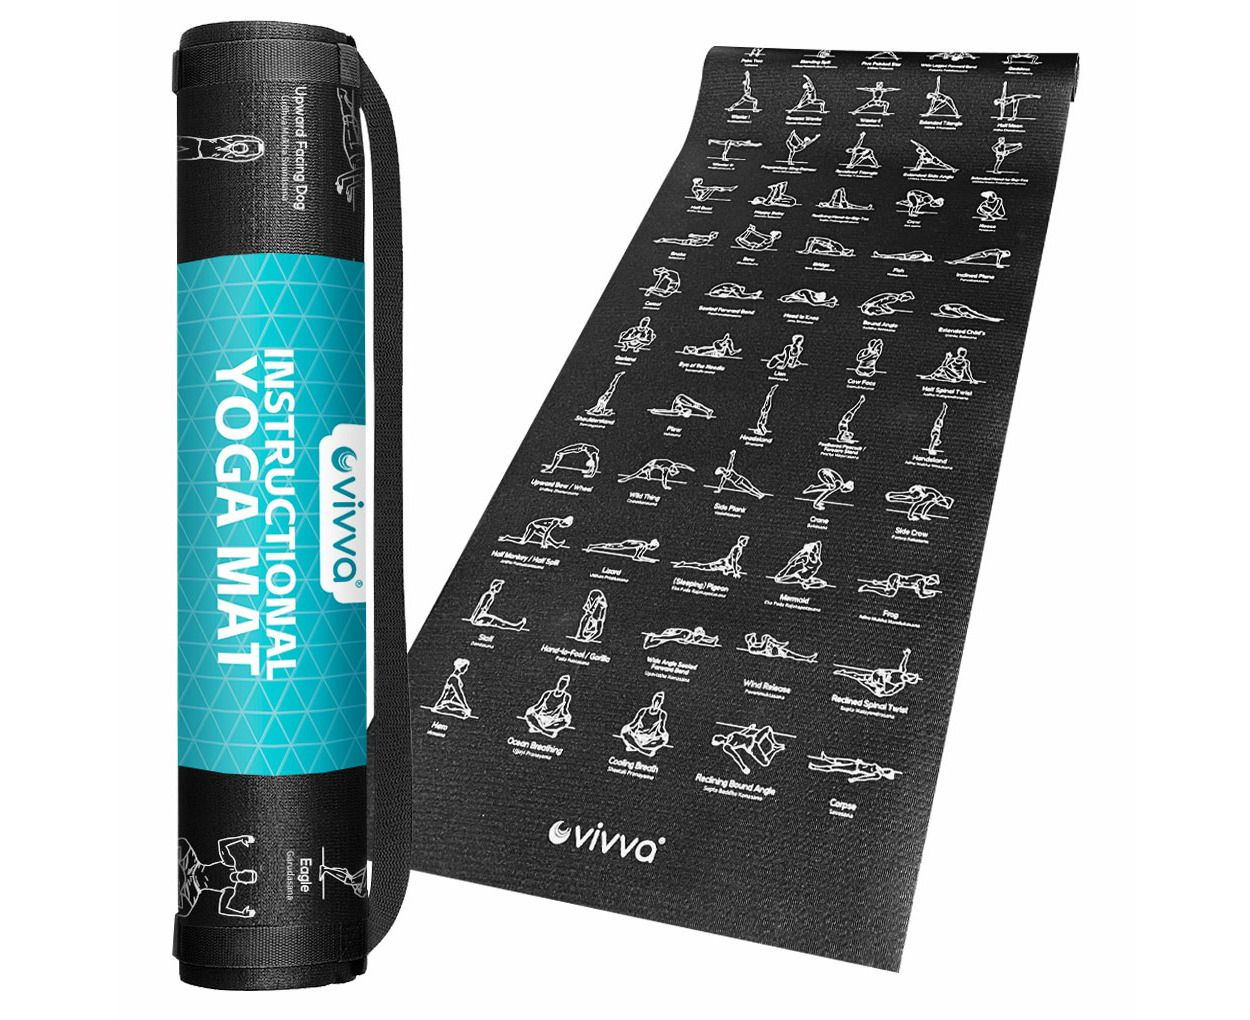 Vivva Instructional Fitness Yoga Mat Non-Slip Exercise Mats with 75 Printed  Yoga Poses for Pilates,Workout,Stretching,Home and Gym - 173x61x0.6cm,  Black